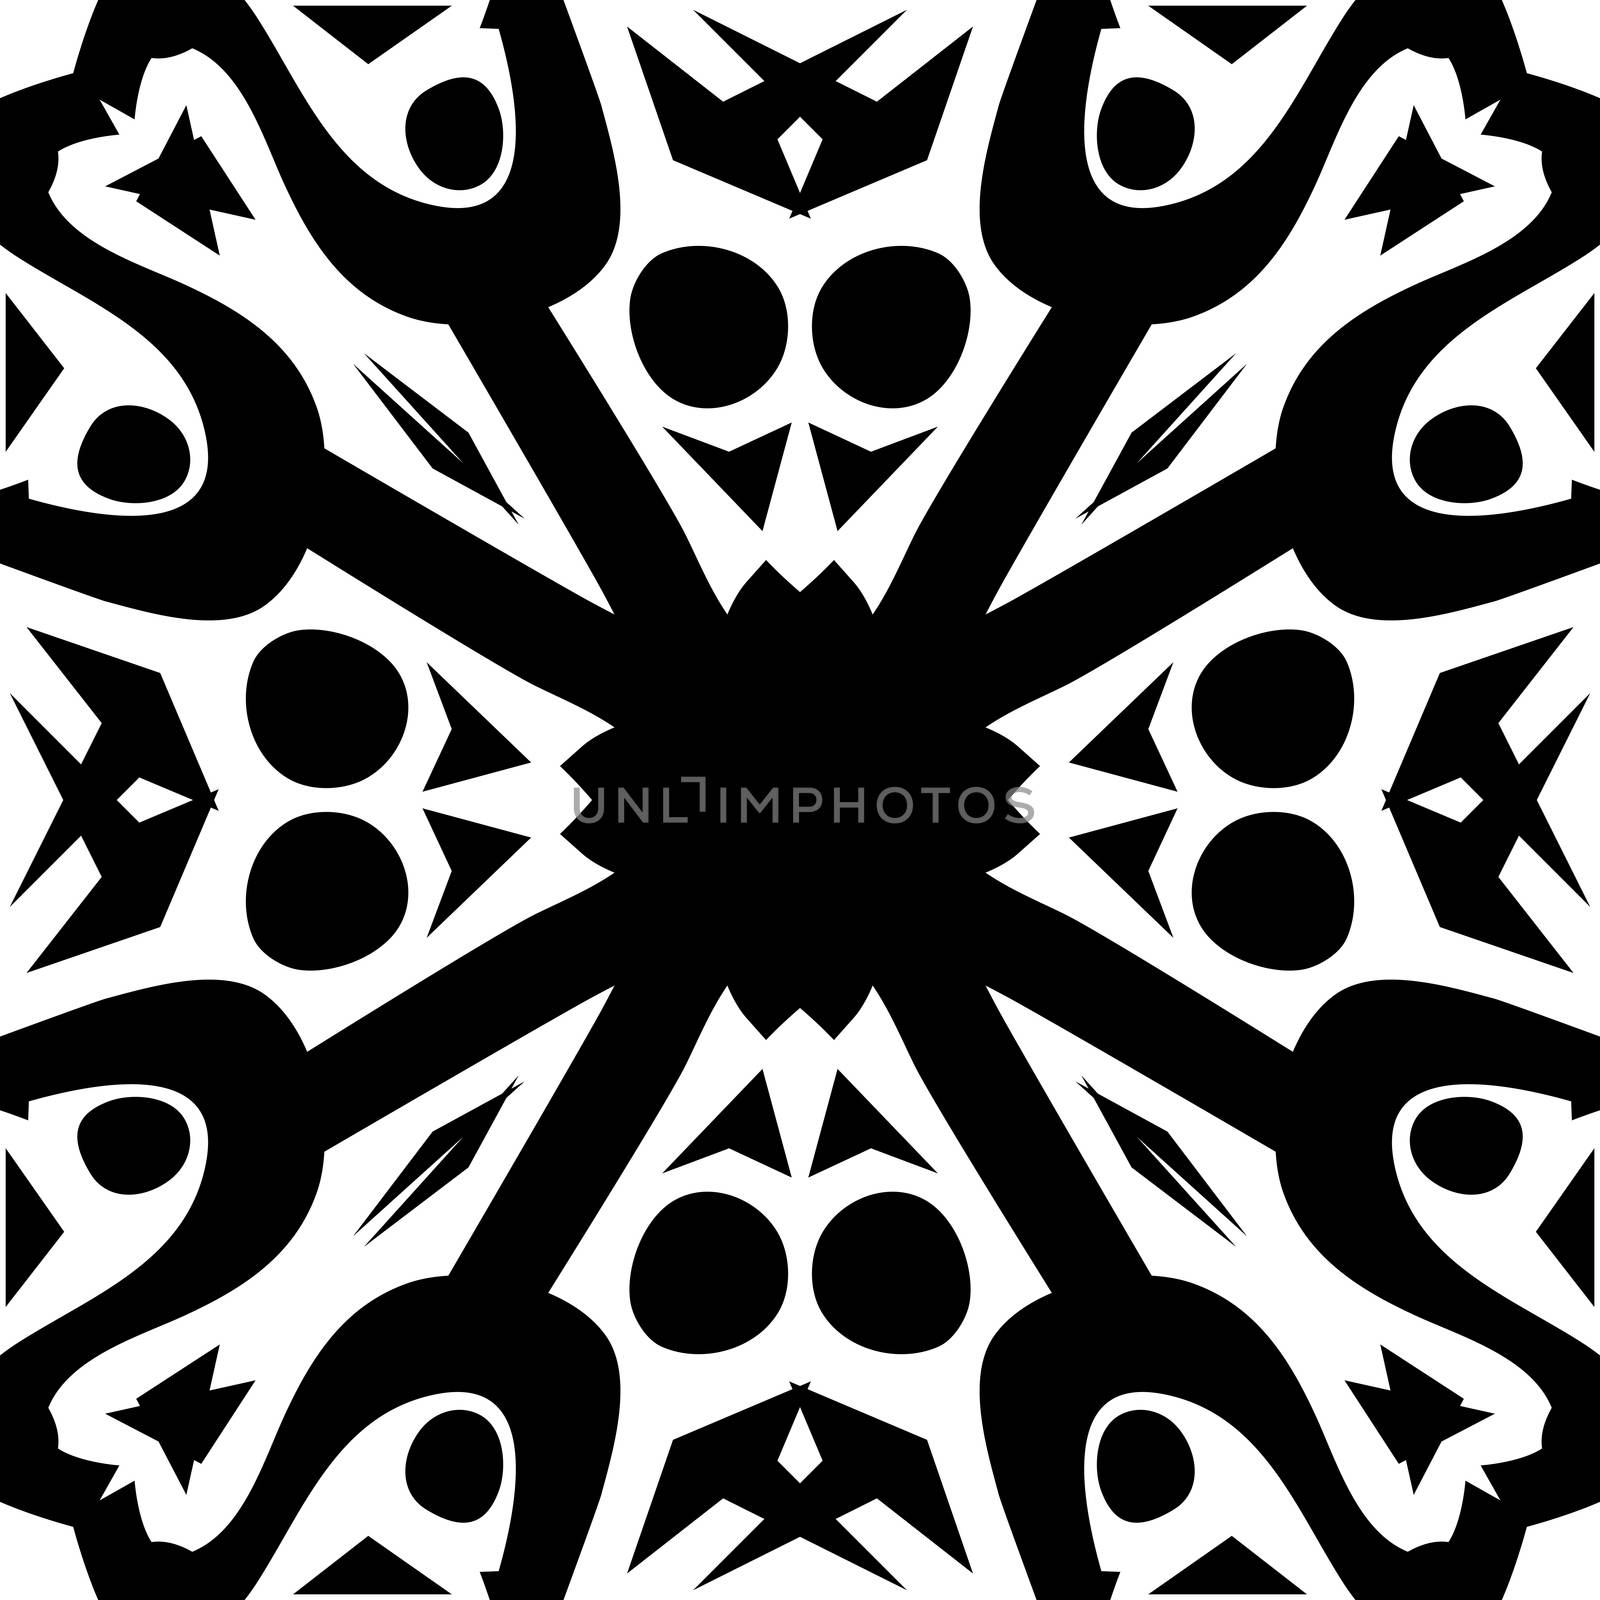 Decorative repeating black and white tile patterns